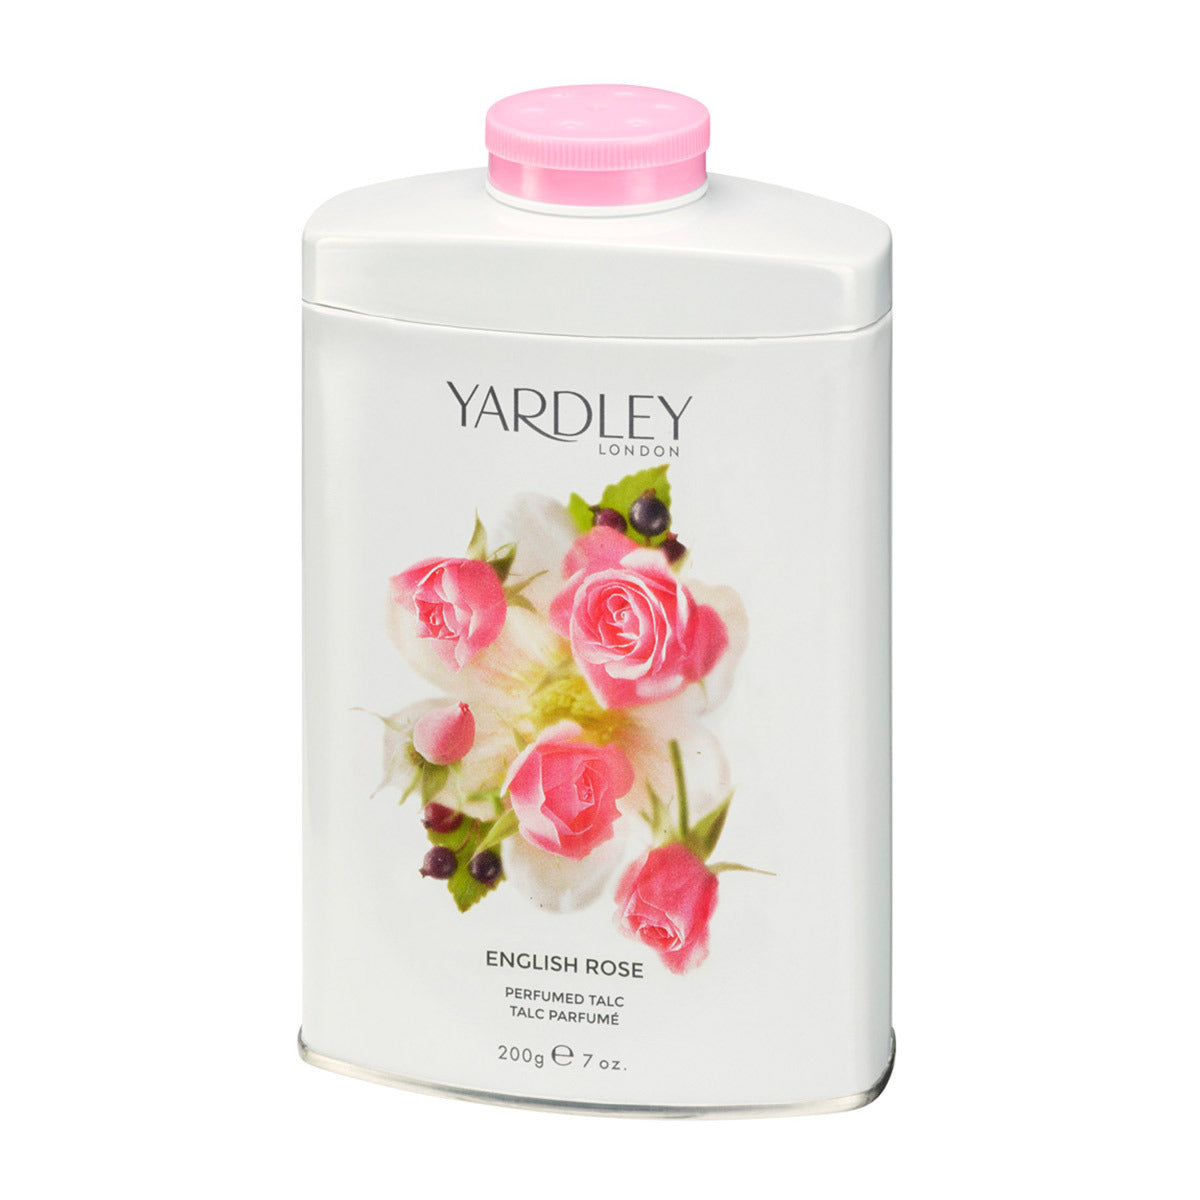 Primary image of English Rose Perfumed Talc